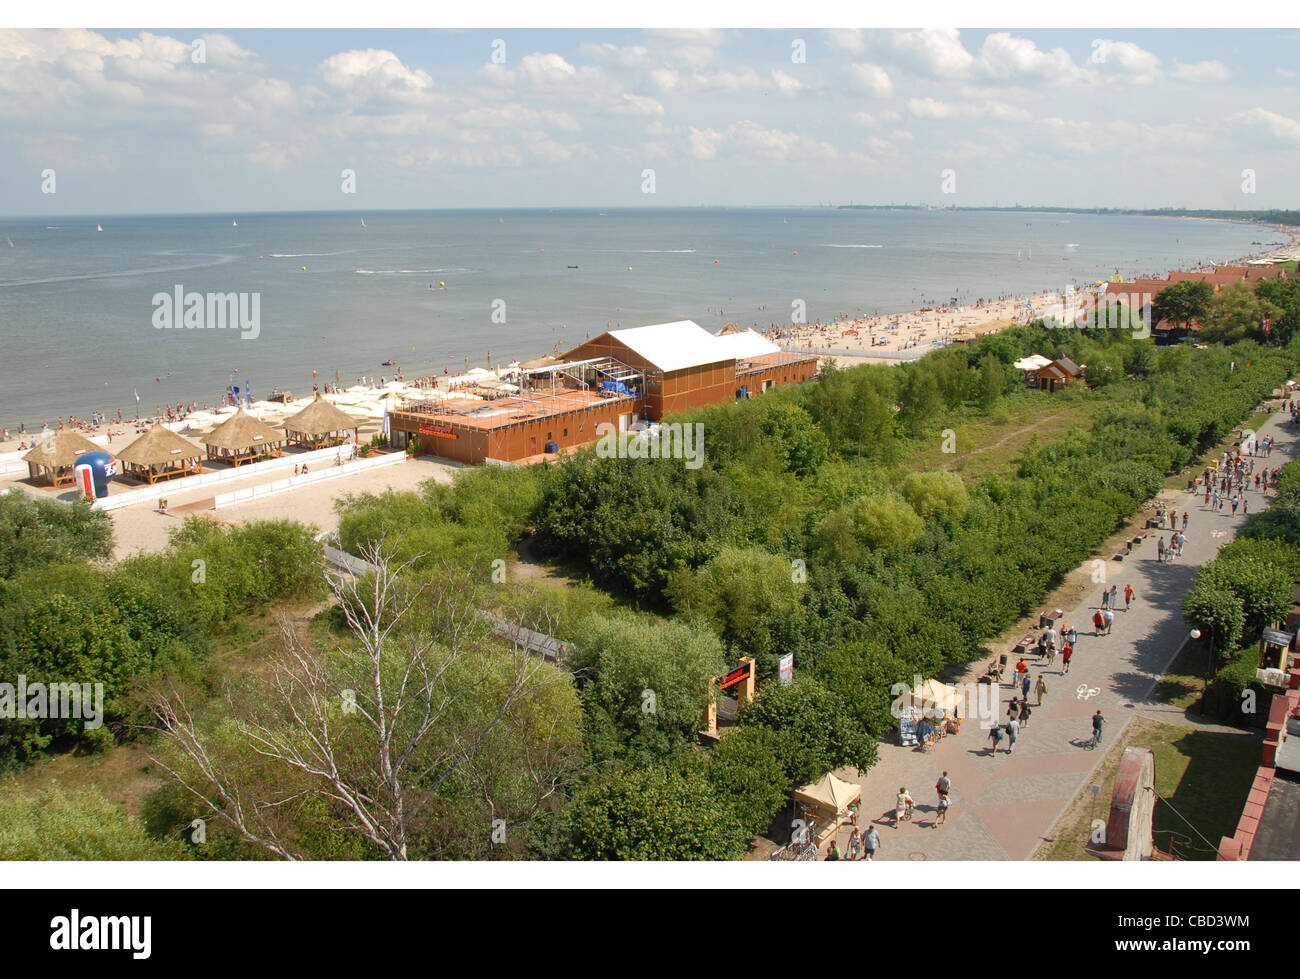 Looking from the lighthouse onto the promenade along the south beach and Baltic Sea shores in the seaside resort Sopot in Pomerania, Poland Stock Photo